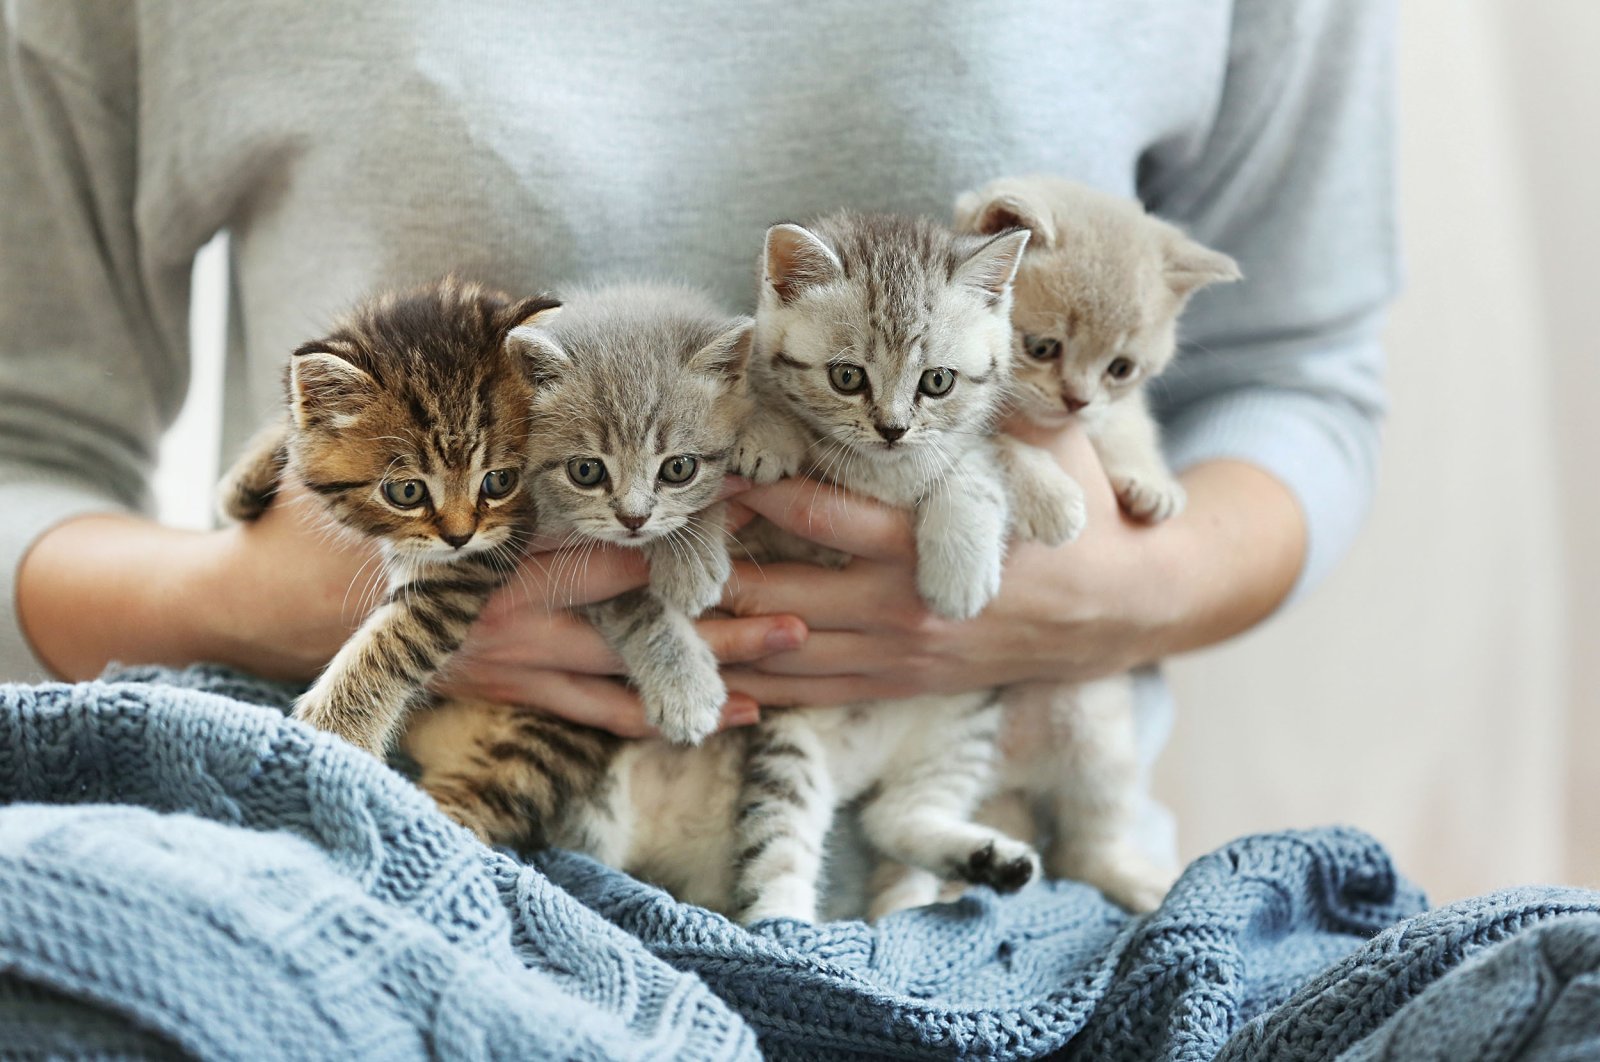 A woman holding small cute kittens in this undated file photo. (Shutterstock File Photo)